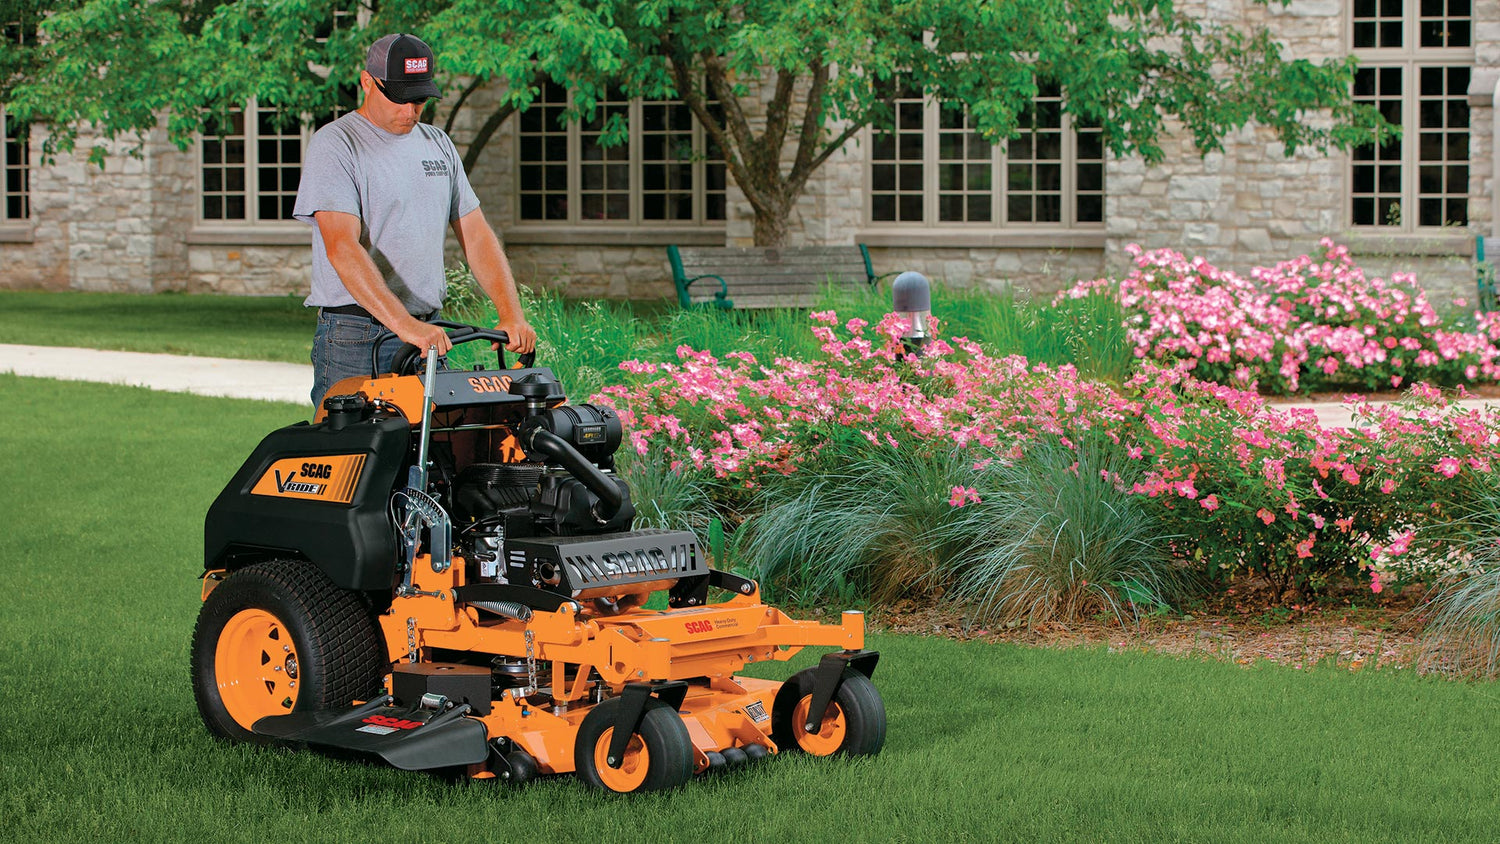 STAND-ON MOWERS